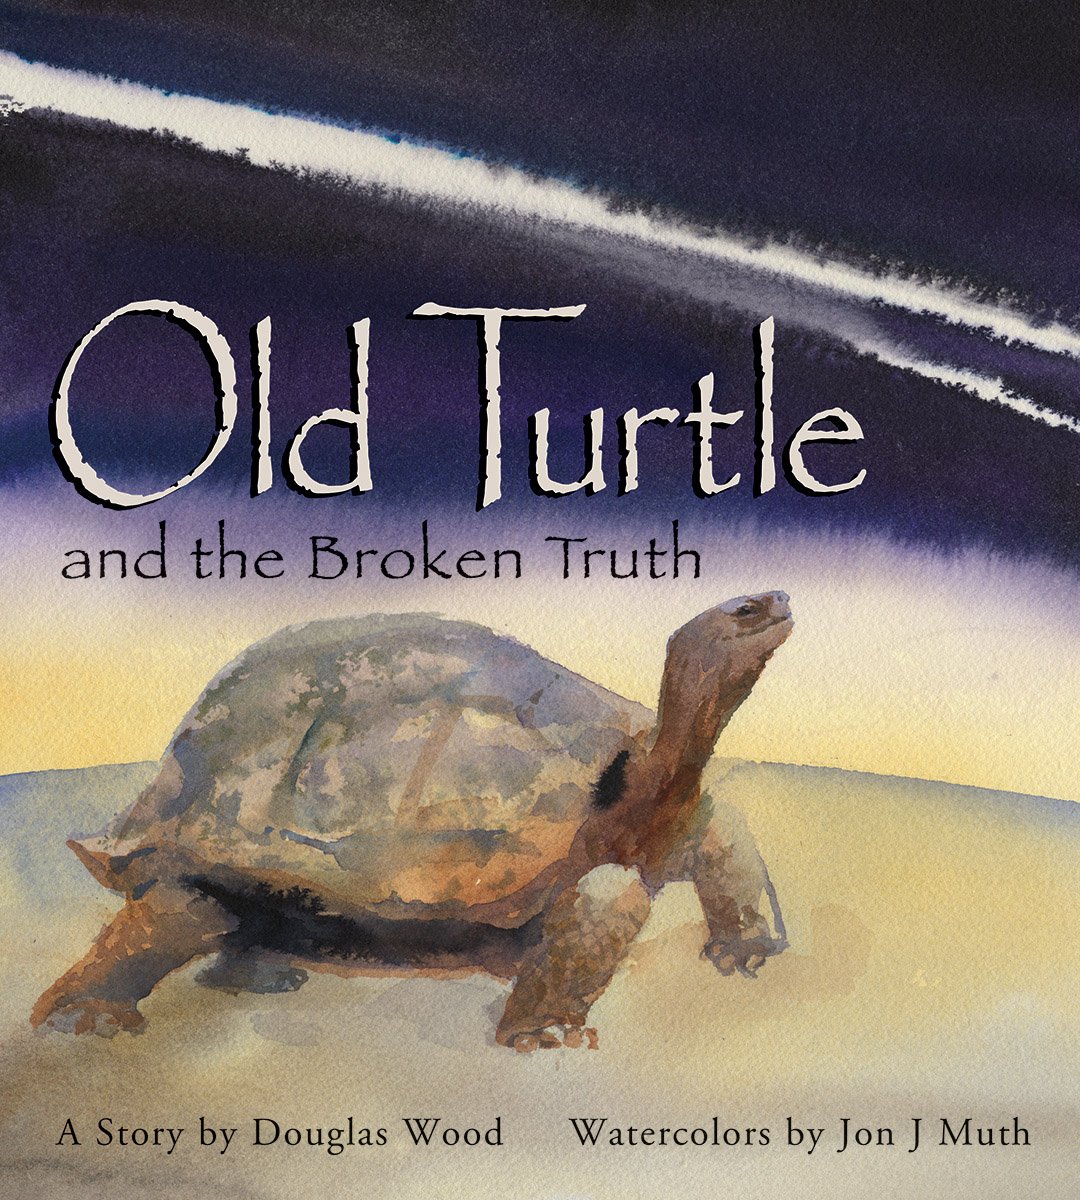 See Old Turtle and the Broken Truth in Library Catalog